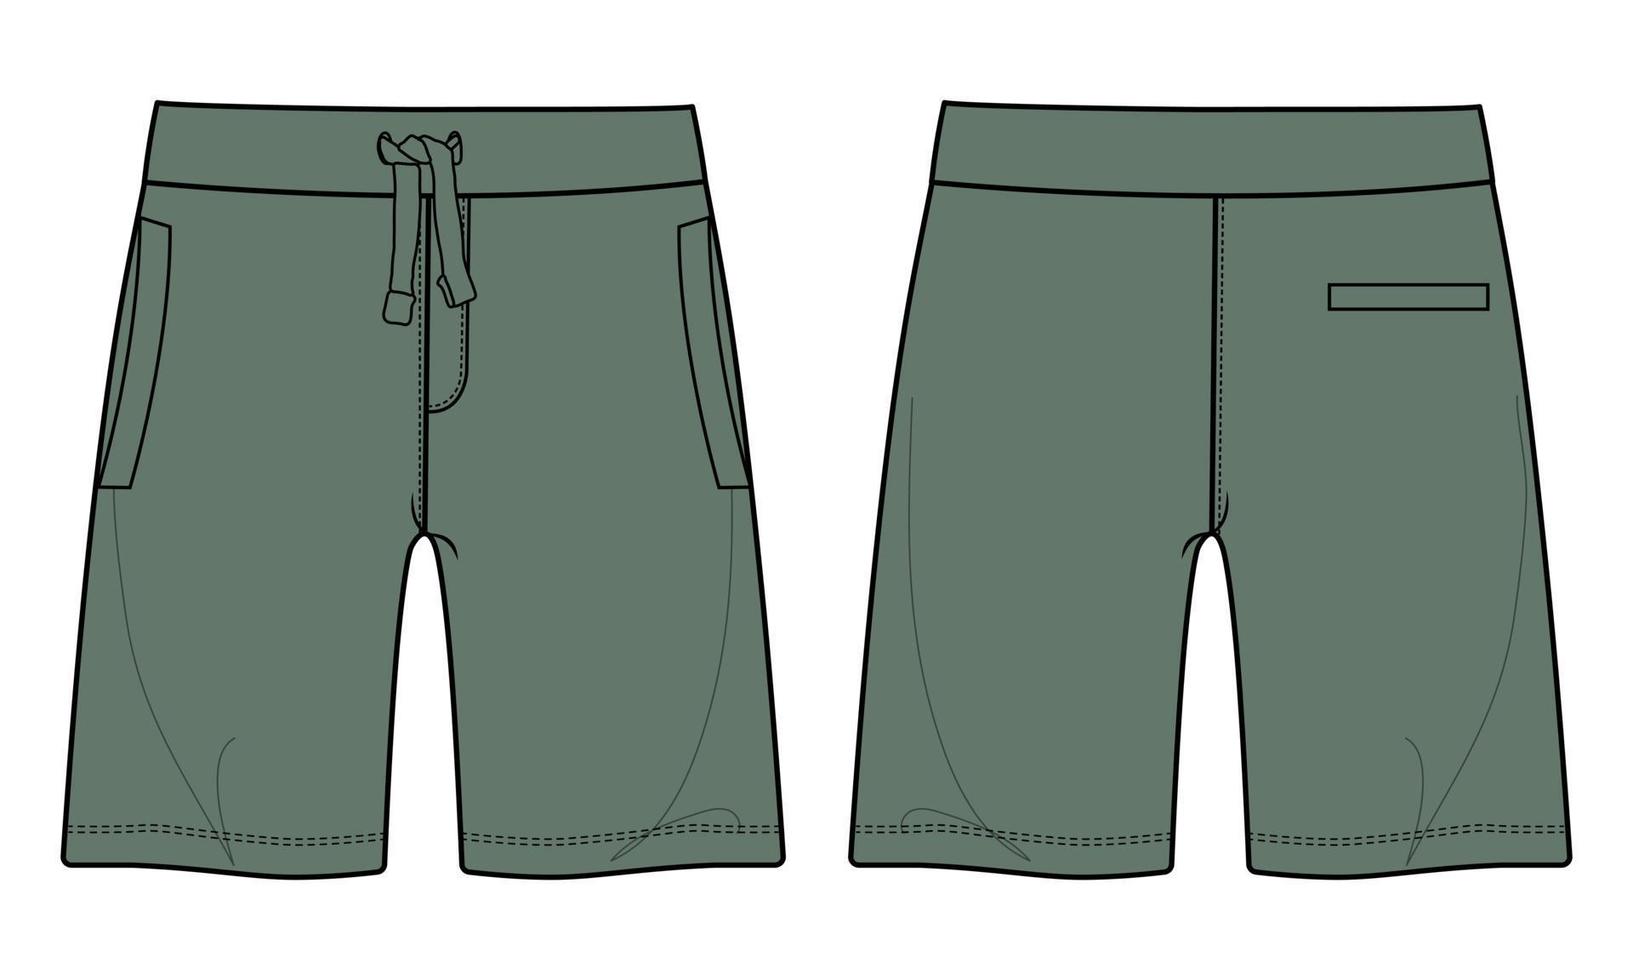 Boys Sweat shorts pant technical fashion flat sketch vector illustration green color template